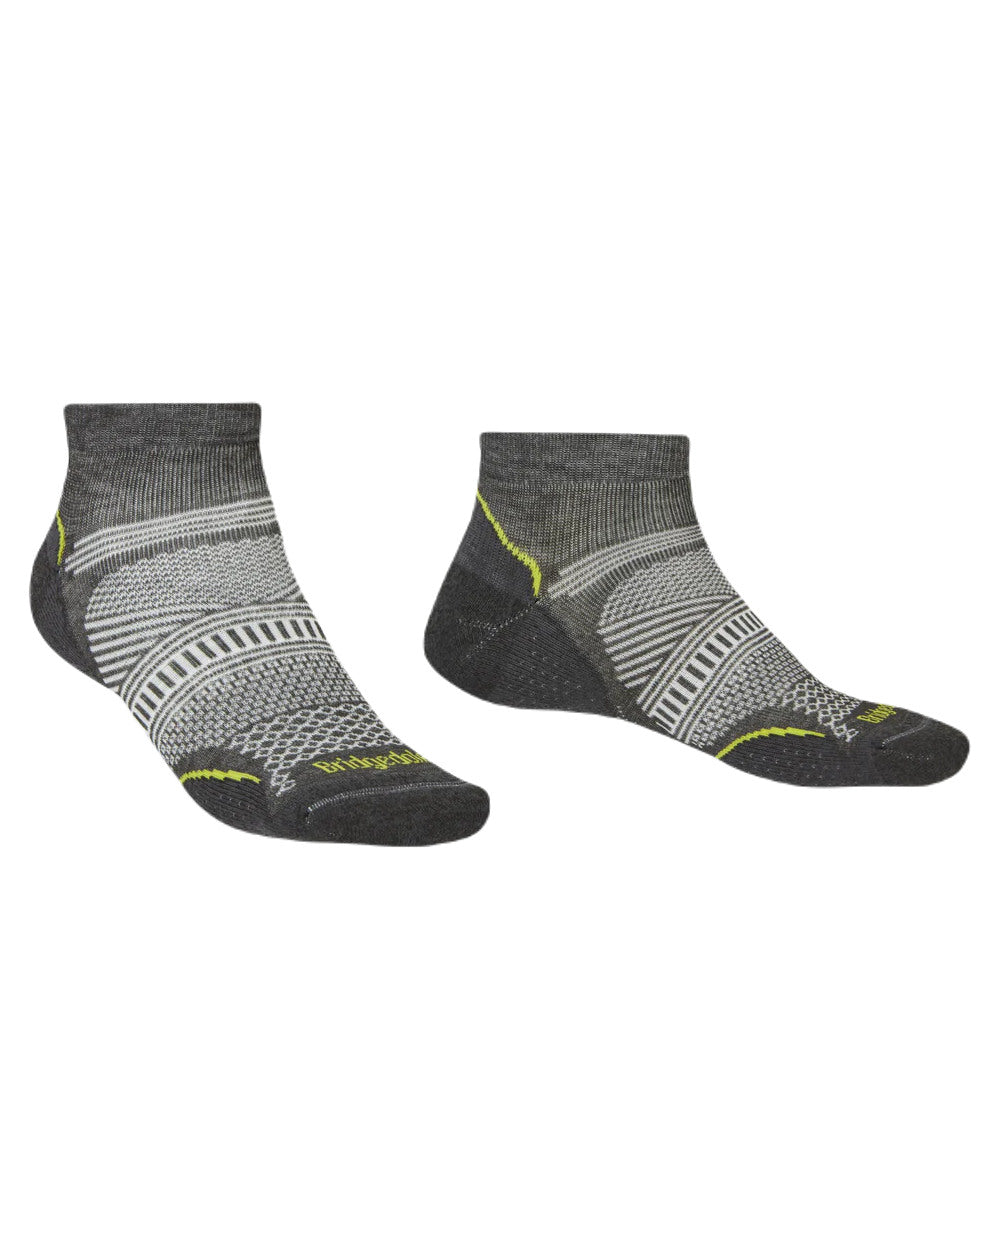 Graphite Coloured Bridgedale Mens Ultra Light T2 Coolmax Performance Low Socks On A White Background 